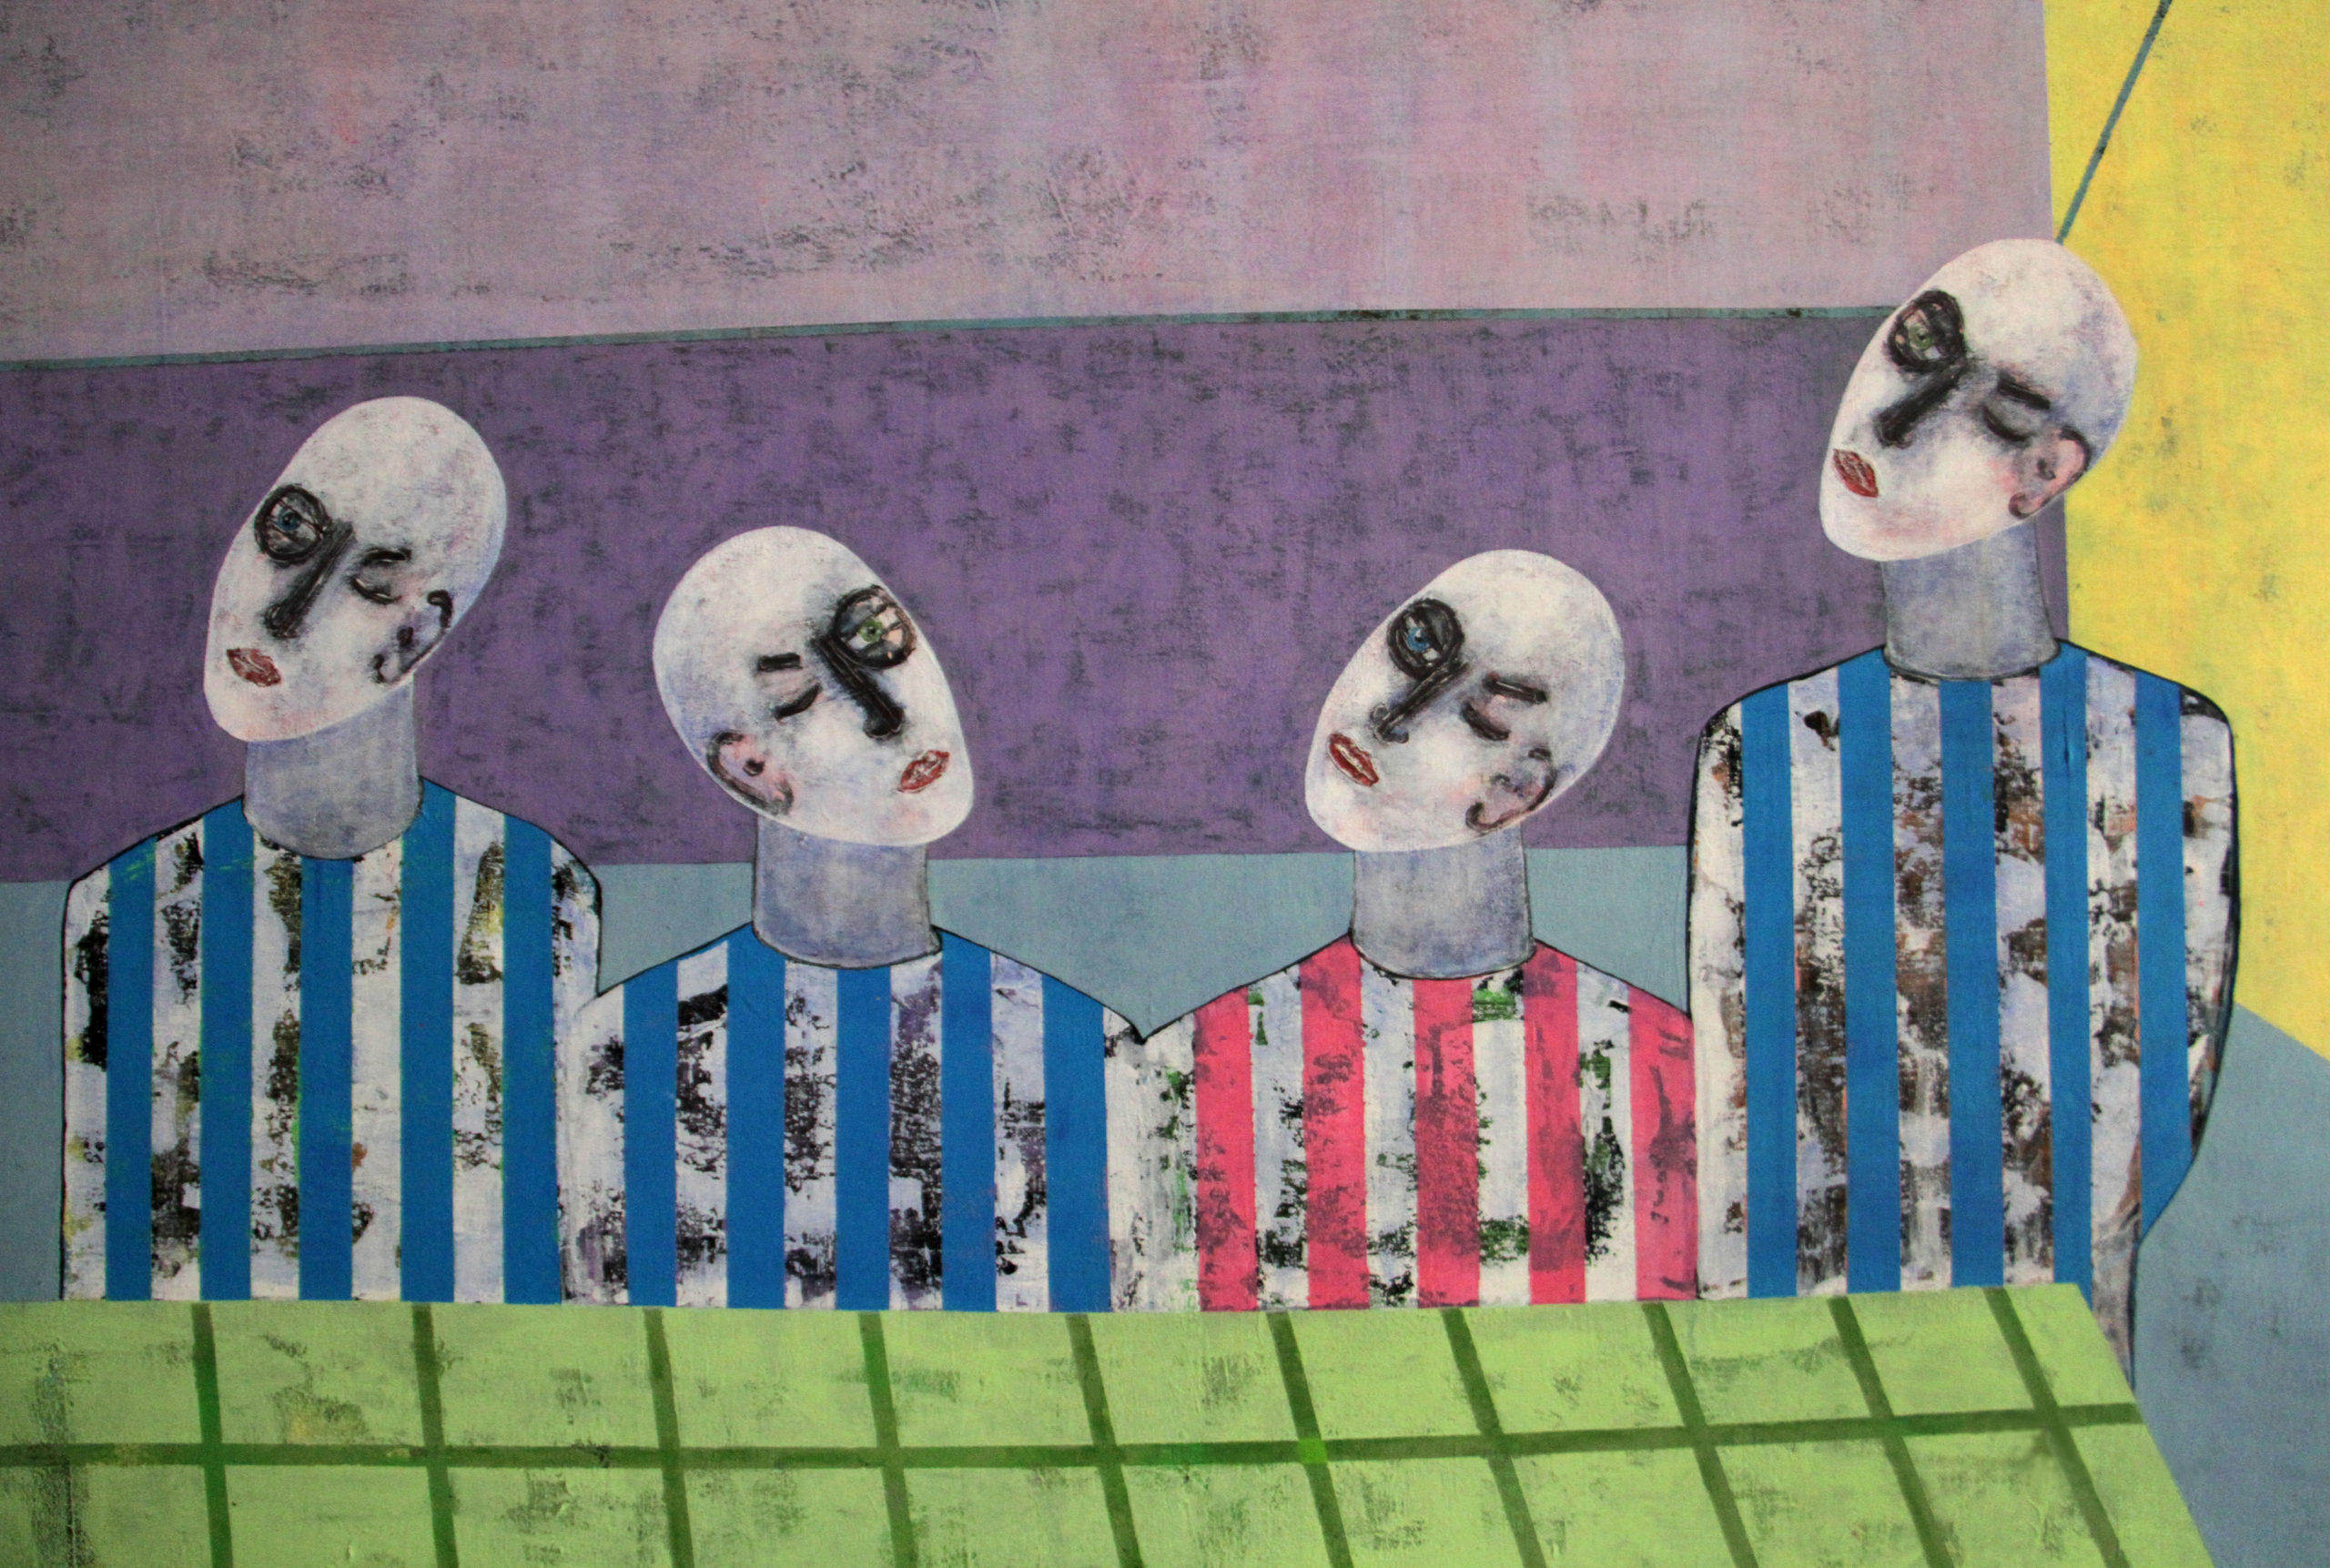 An acrylic painting of four busts against a color-blocked background in pink, purple, yellow, blue and lime-green. Three of the busts are wearing white and blue striped shirts and one is wearing a pink and white striped shirt. They are all bald, ghostly white, and tilting their heads.